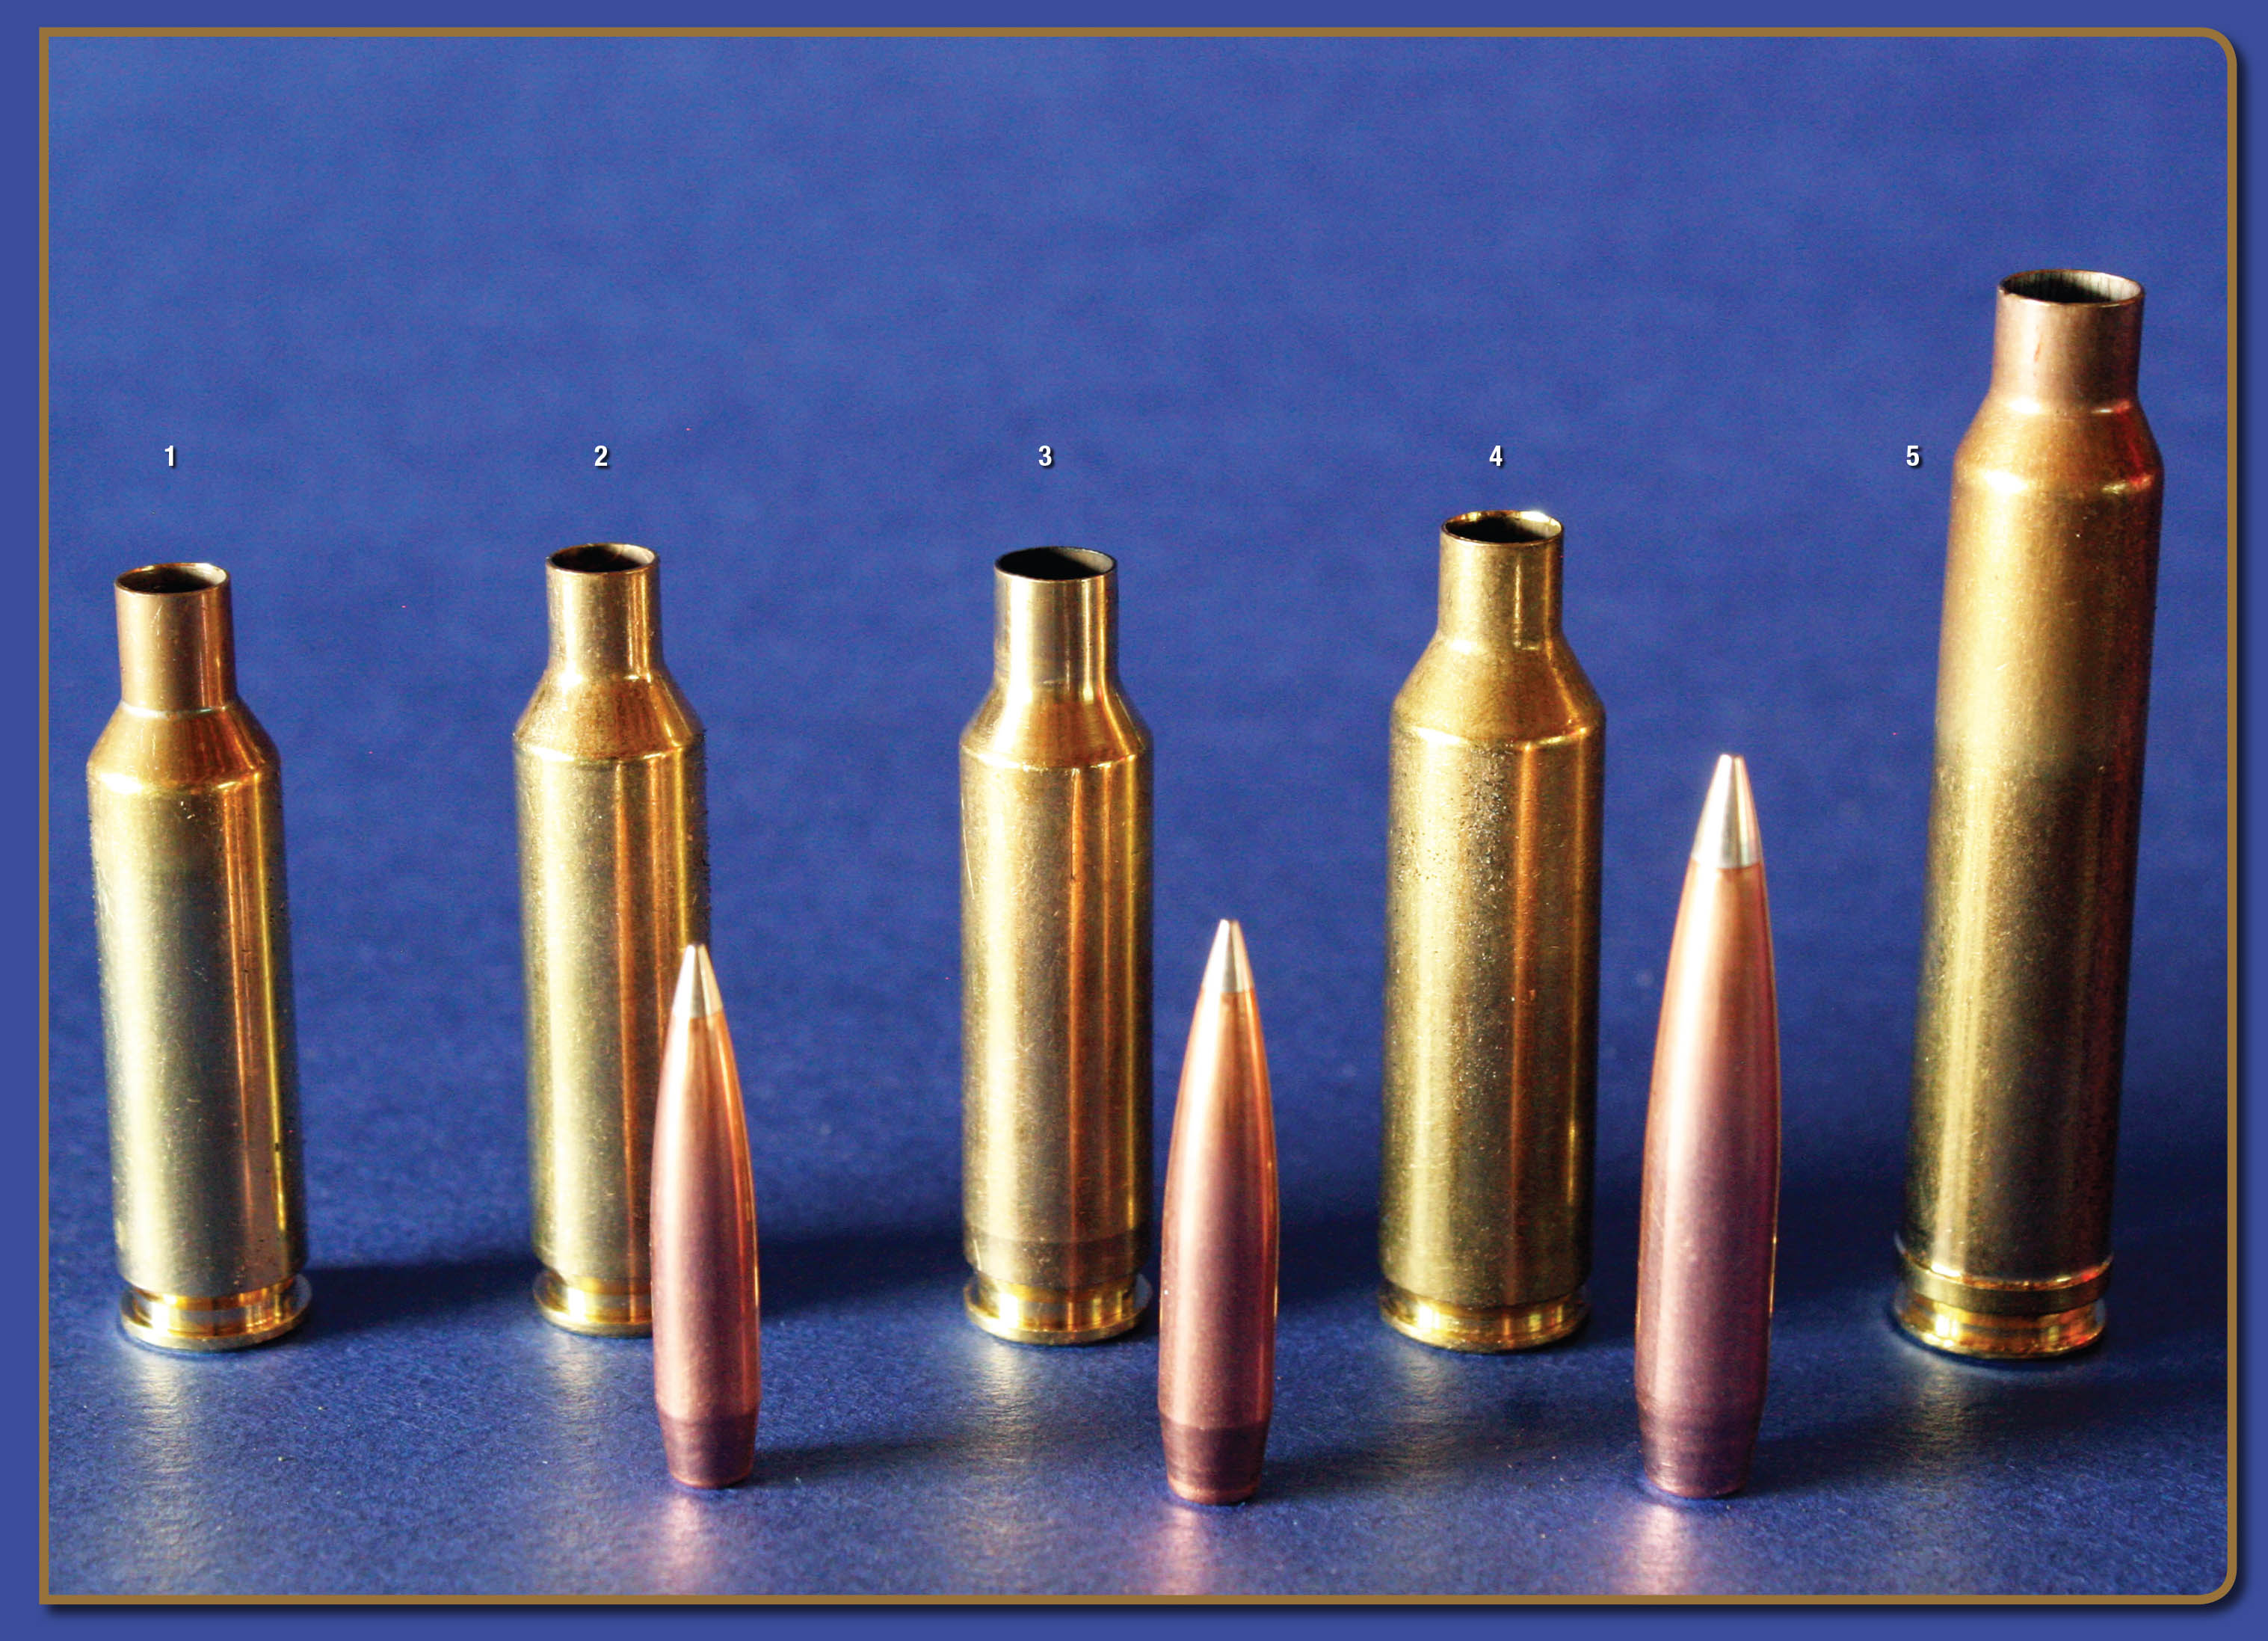 From left, A-TIP bullets include the 110-grain 6mm, 135-grain 6.5mm and 230-grain .30 caliber. Cartridges include the (1) 6XC, (2) 6mm Creedmoor, (3) 6.5 Creedmoor, (4) 6.5 PRC and the (5) .300 Winchester Magnum.